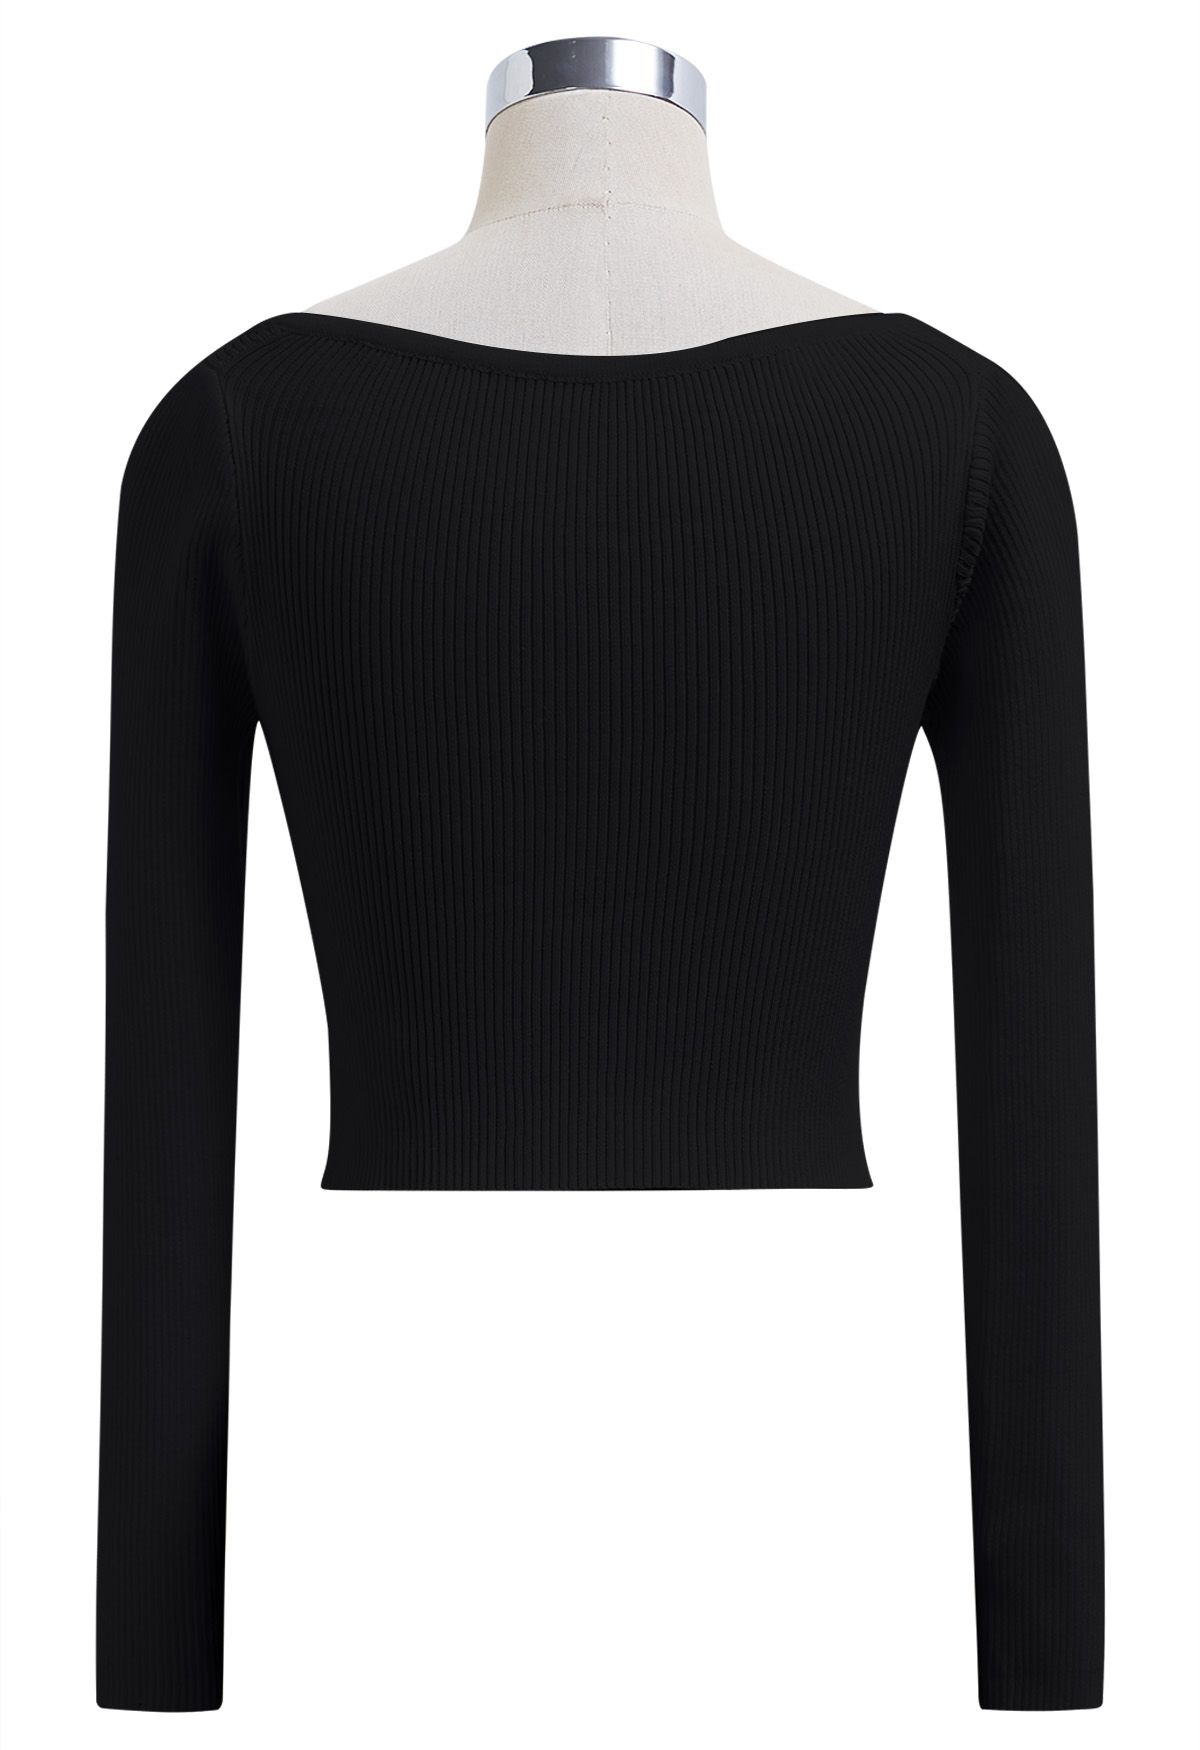 Notched Neckline Ribbed Knit Crop Top in Black - Retro, Indie and ...